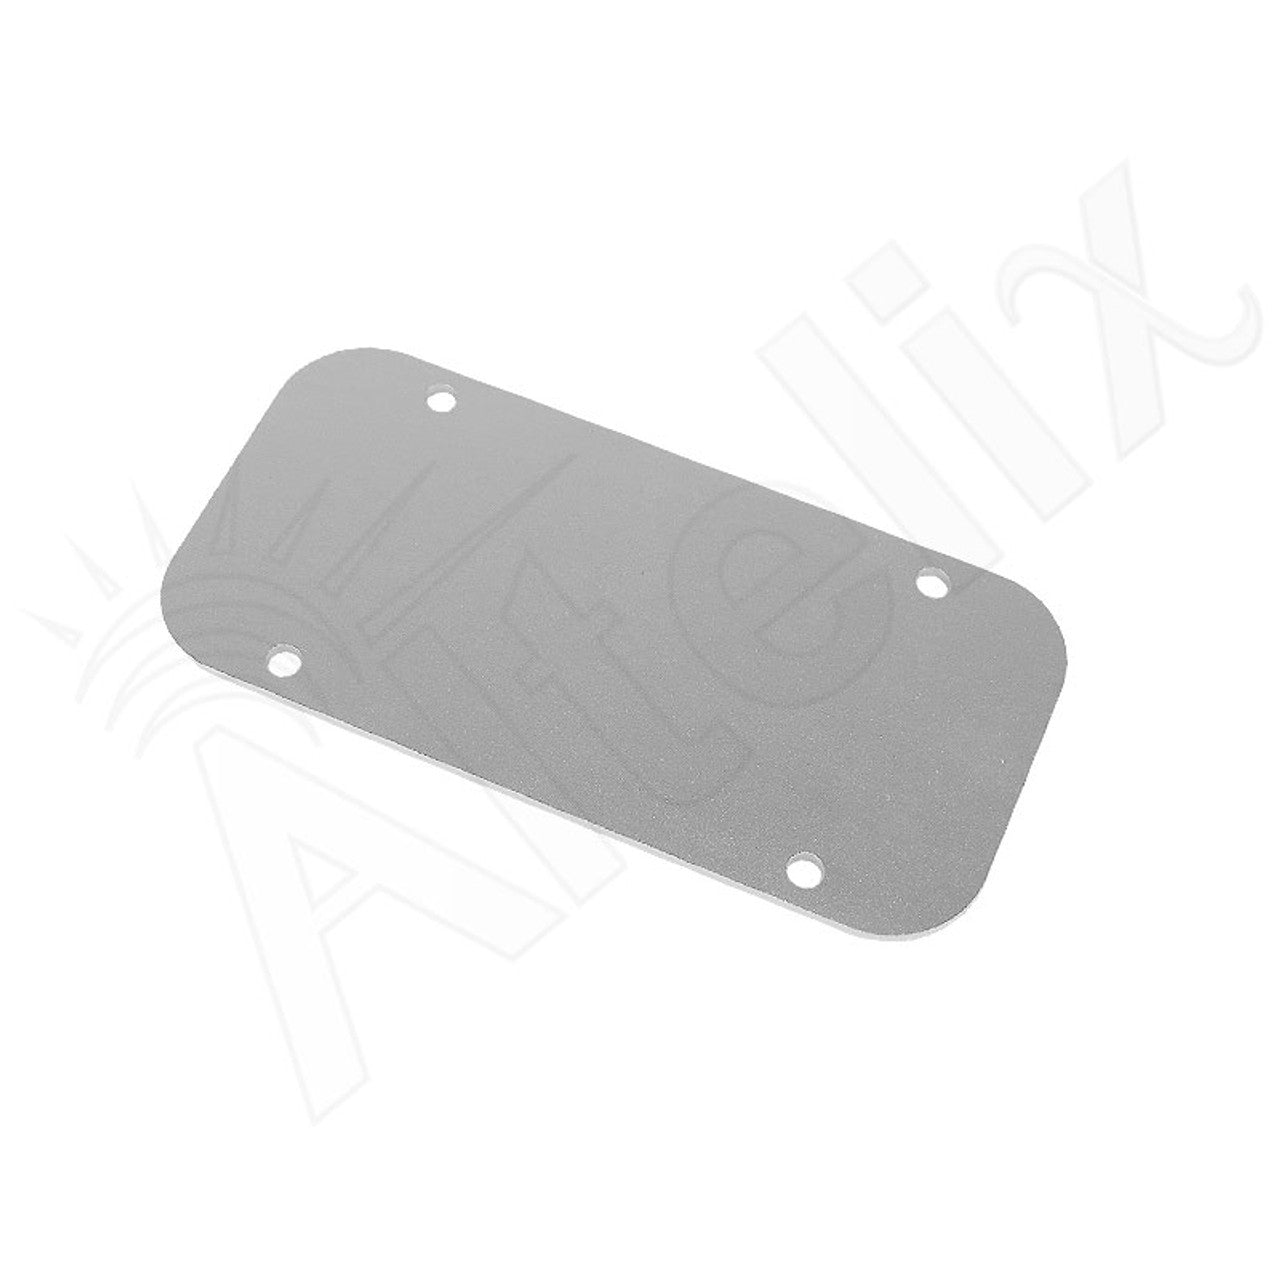 Blank Aluminum Access Panel for NS080806 & NS100806 Enclosures-1